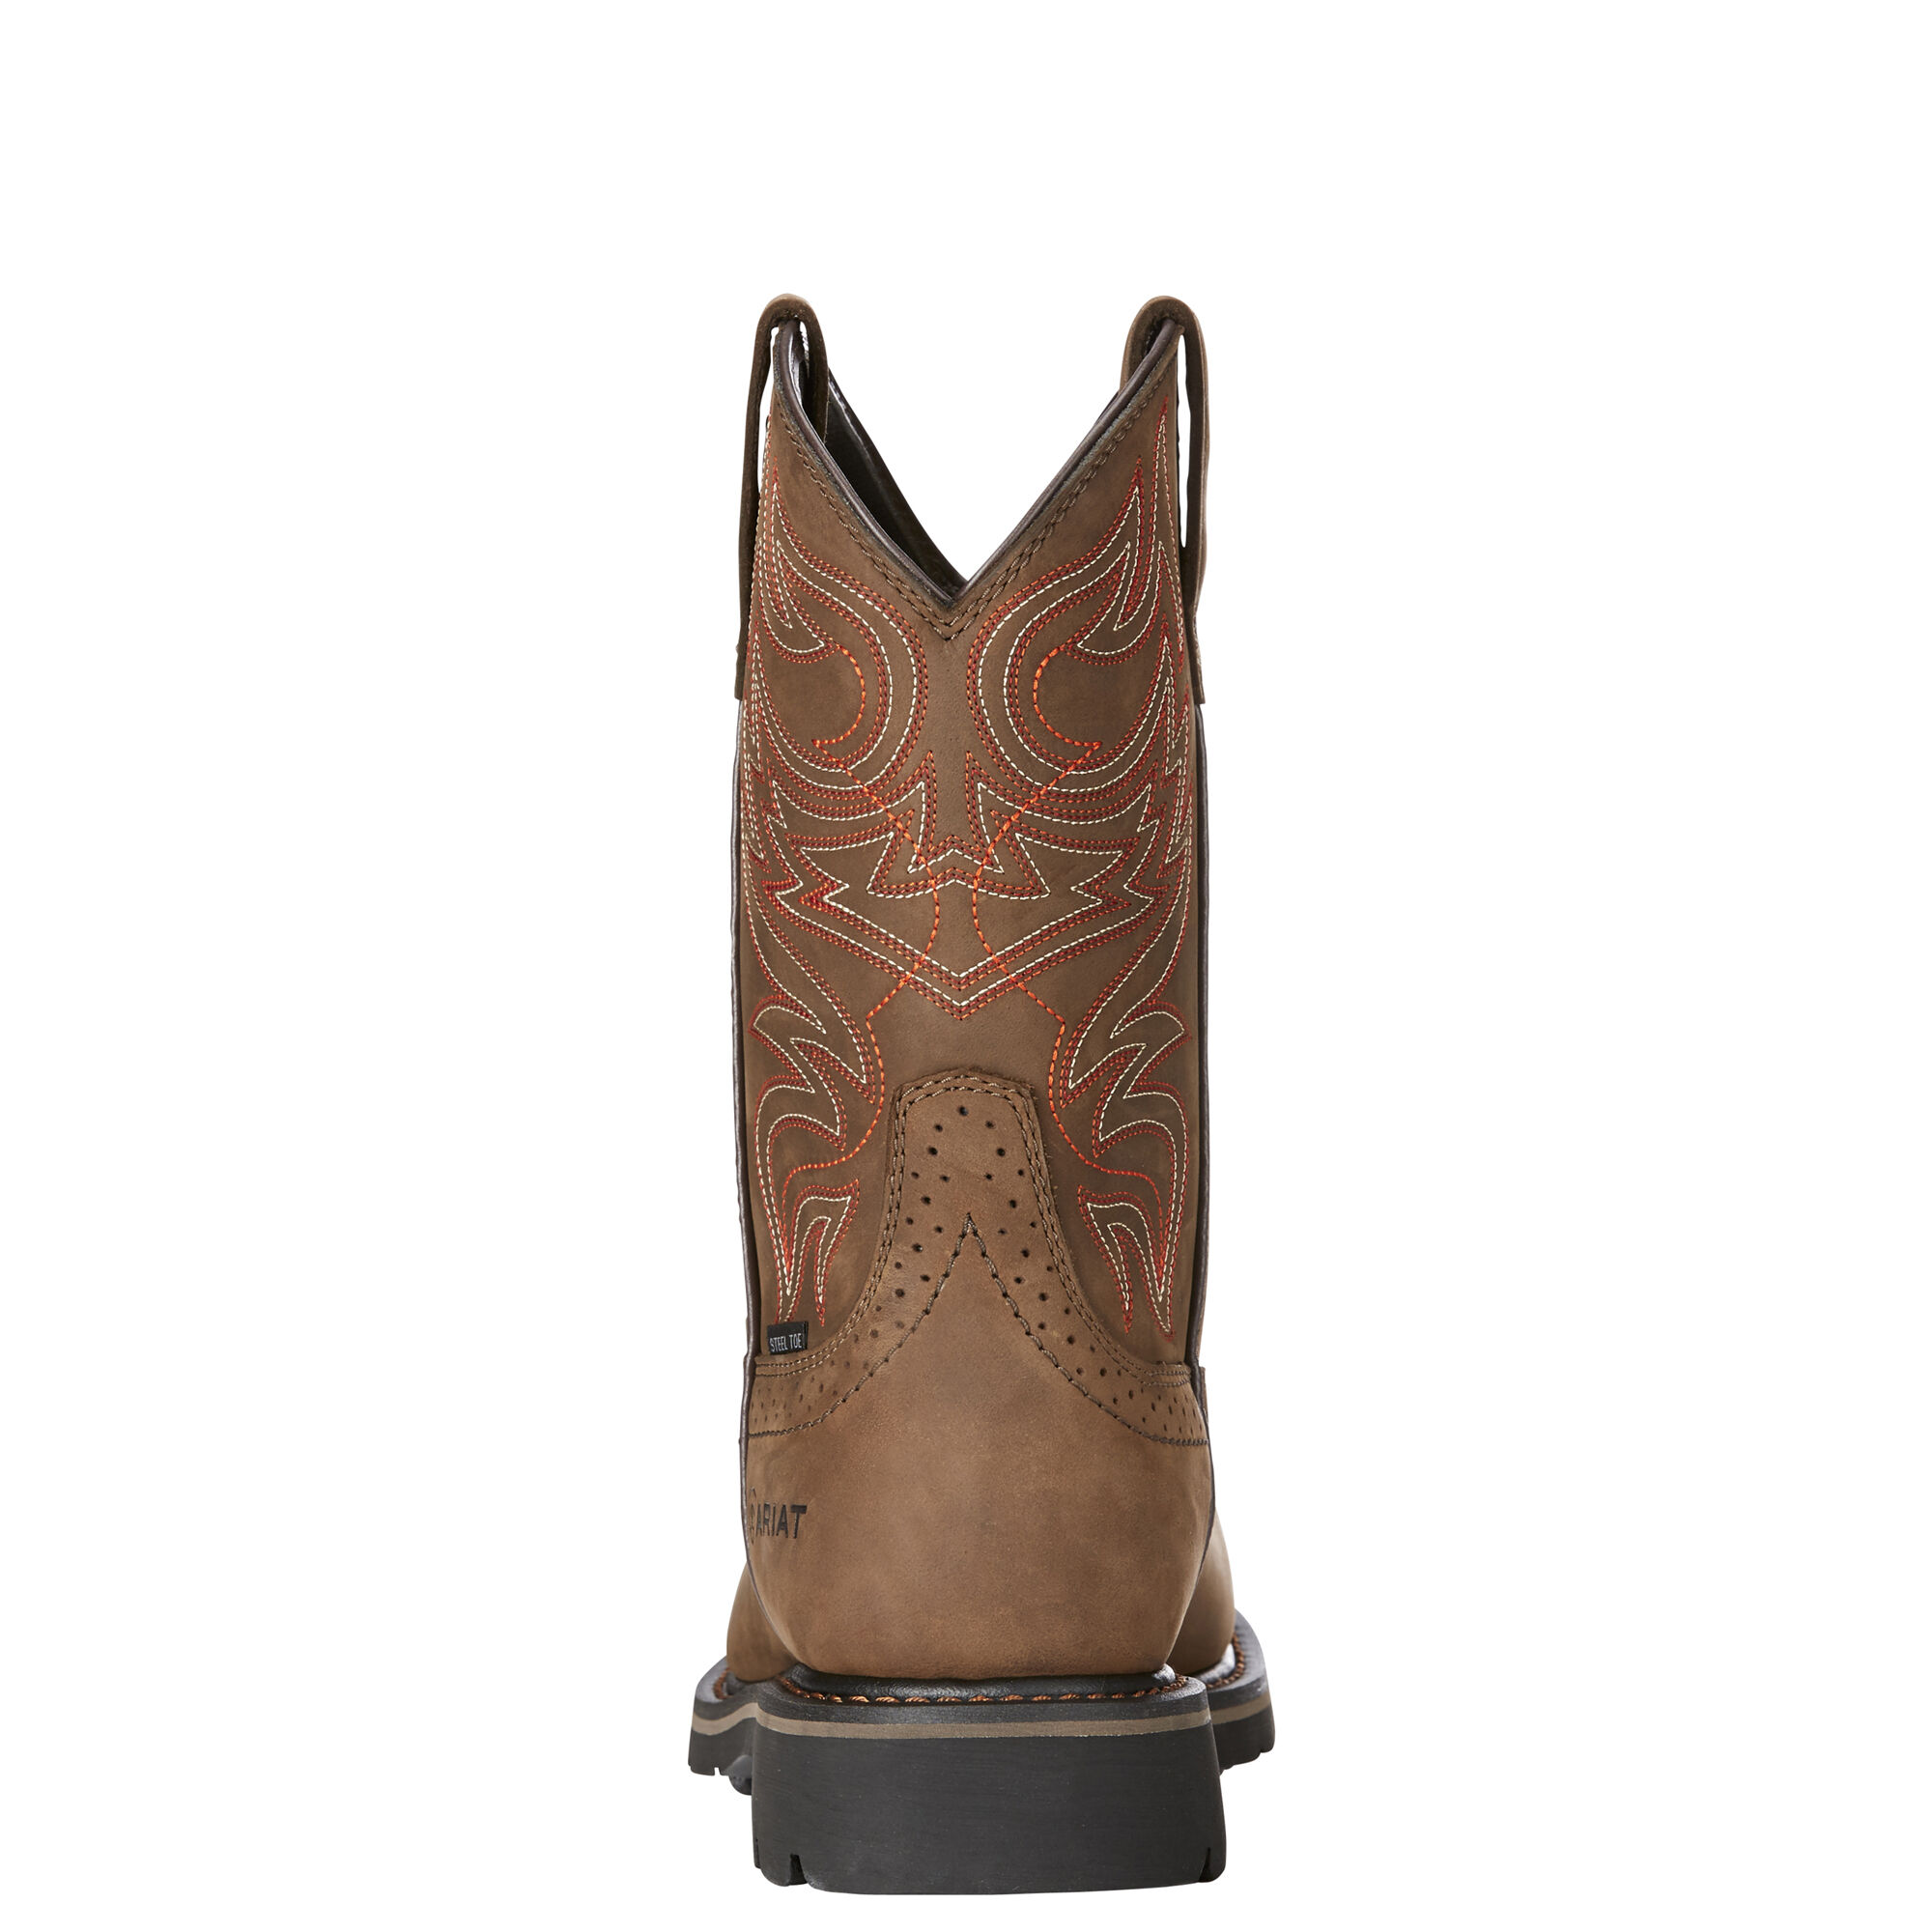 ariat sierra work boots square toe